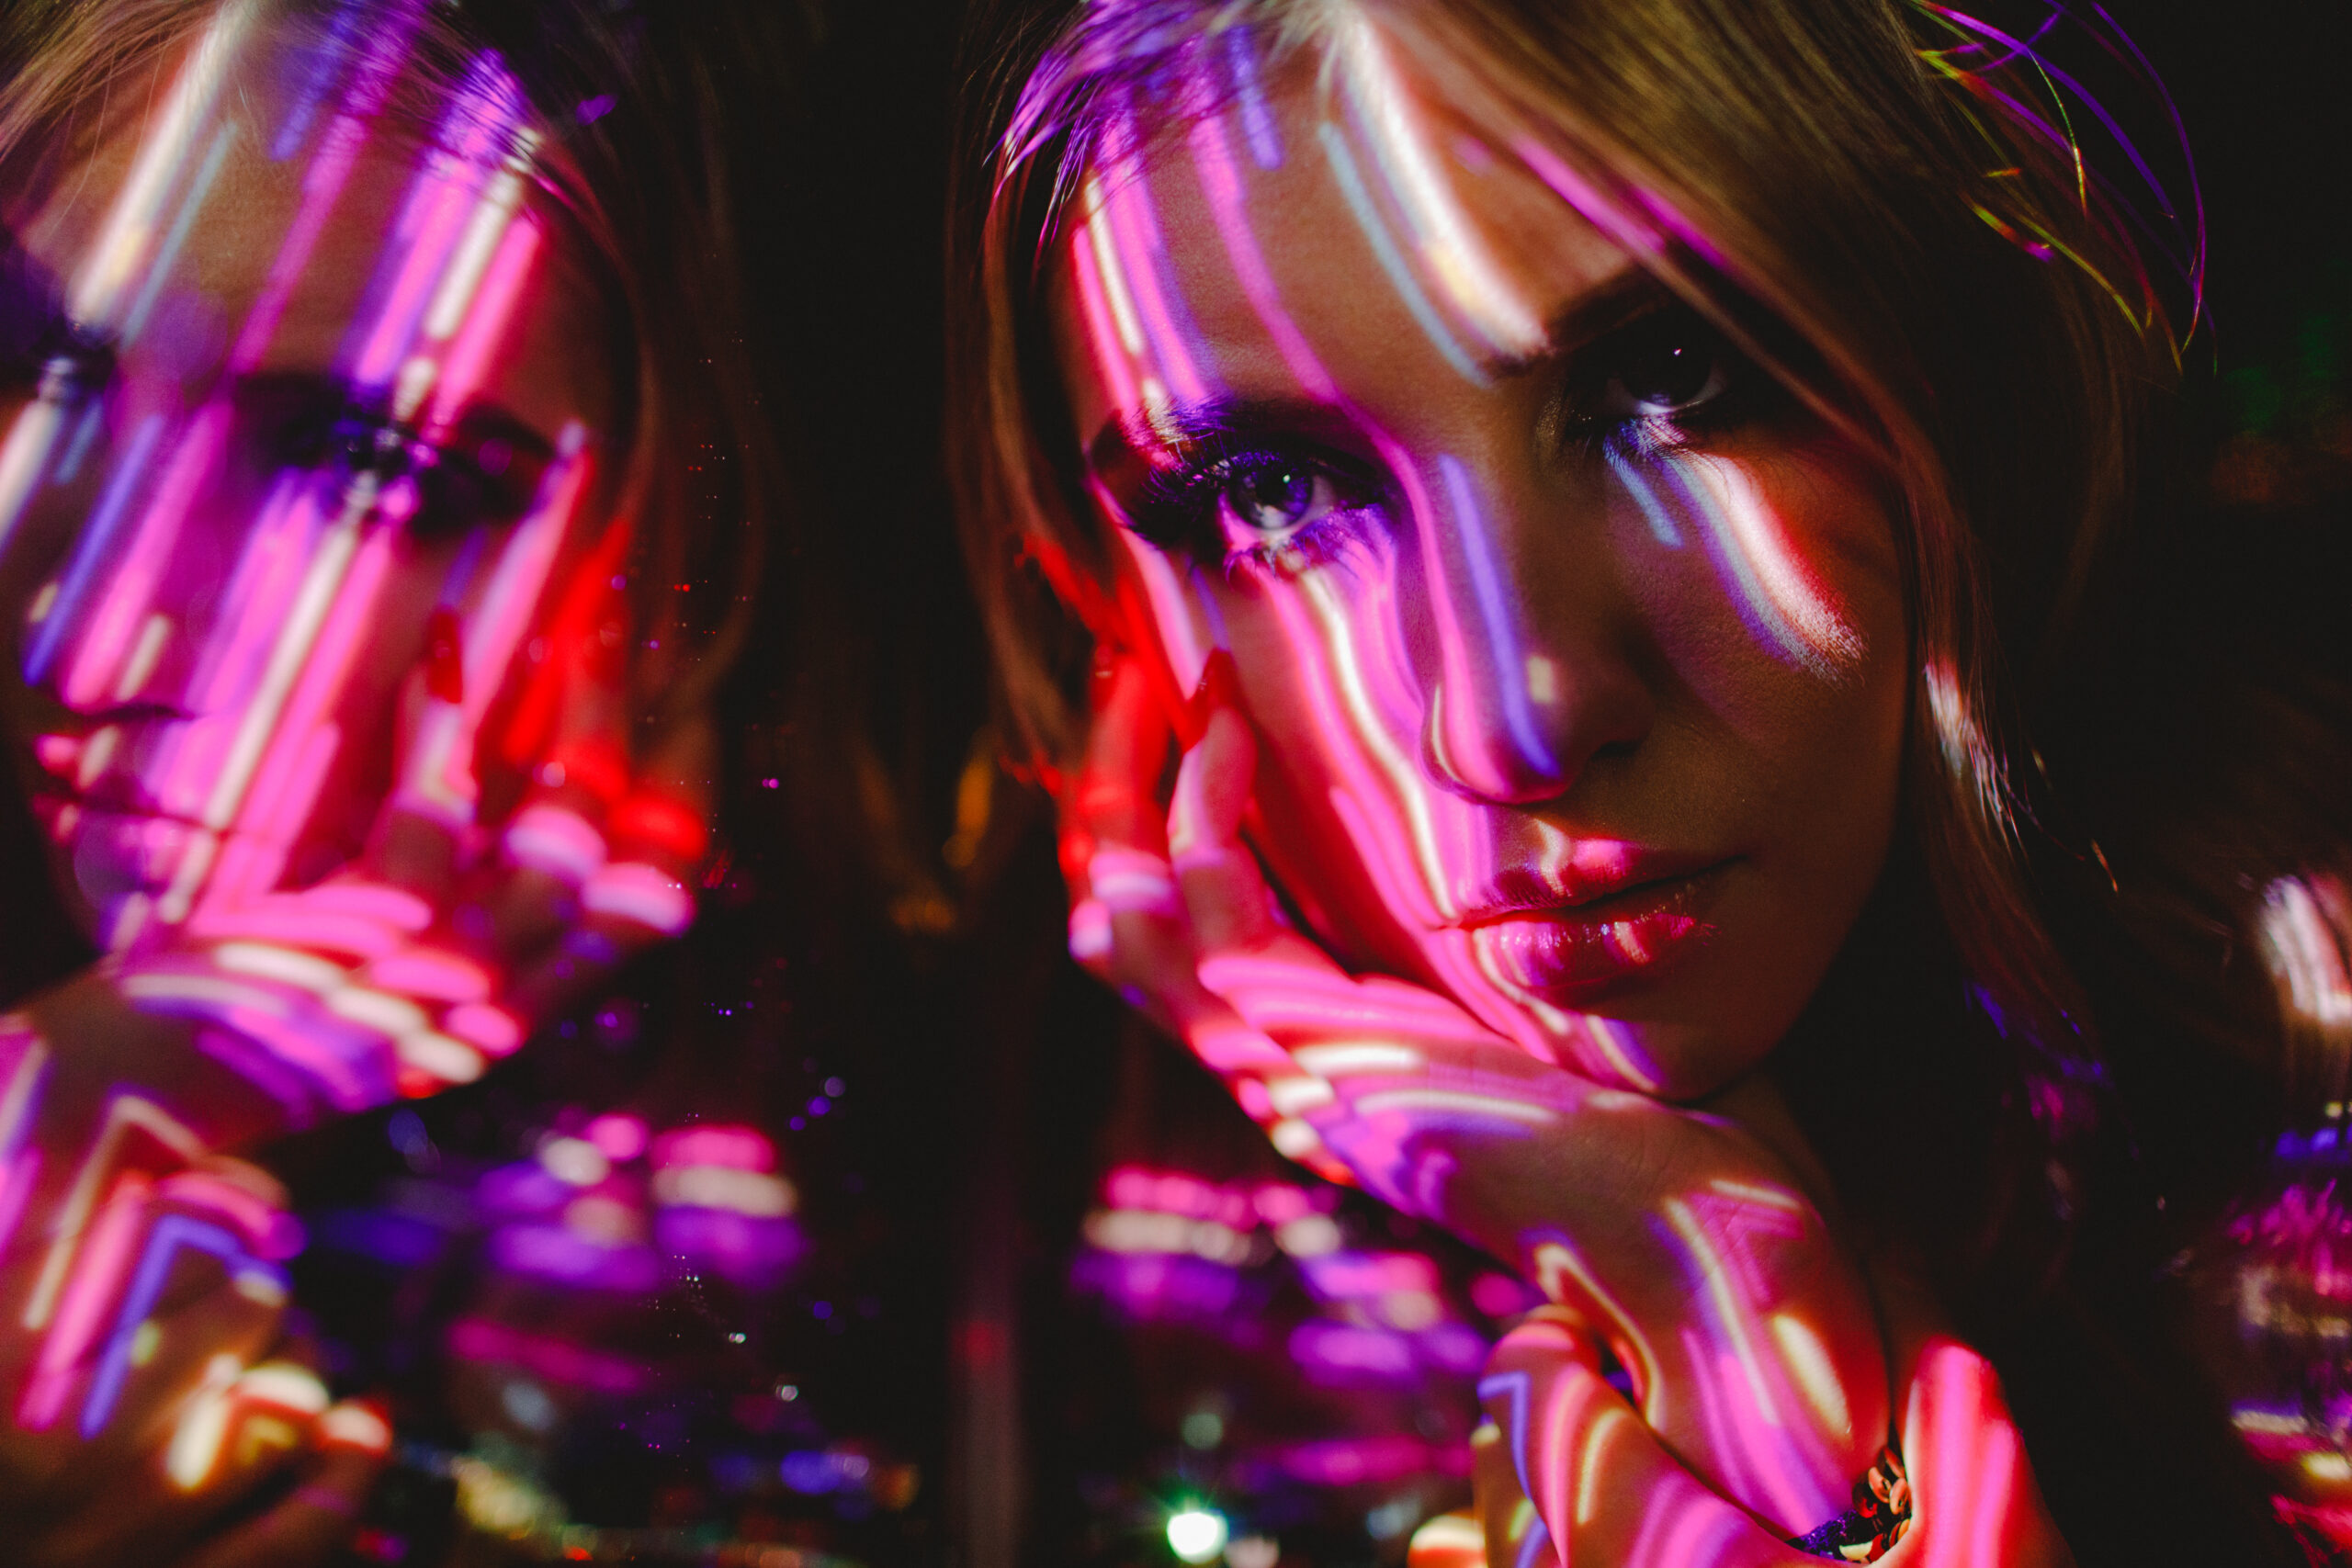 Andrina bathed in neon light beams in her senior editorial photoshoot headshot.